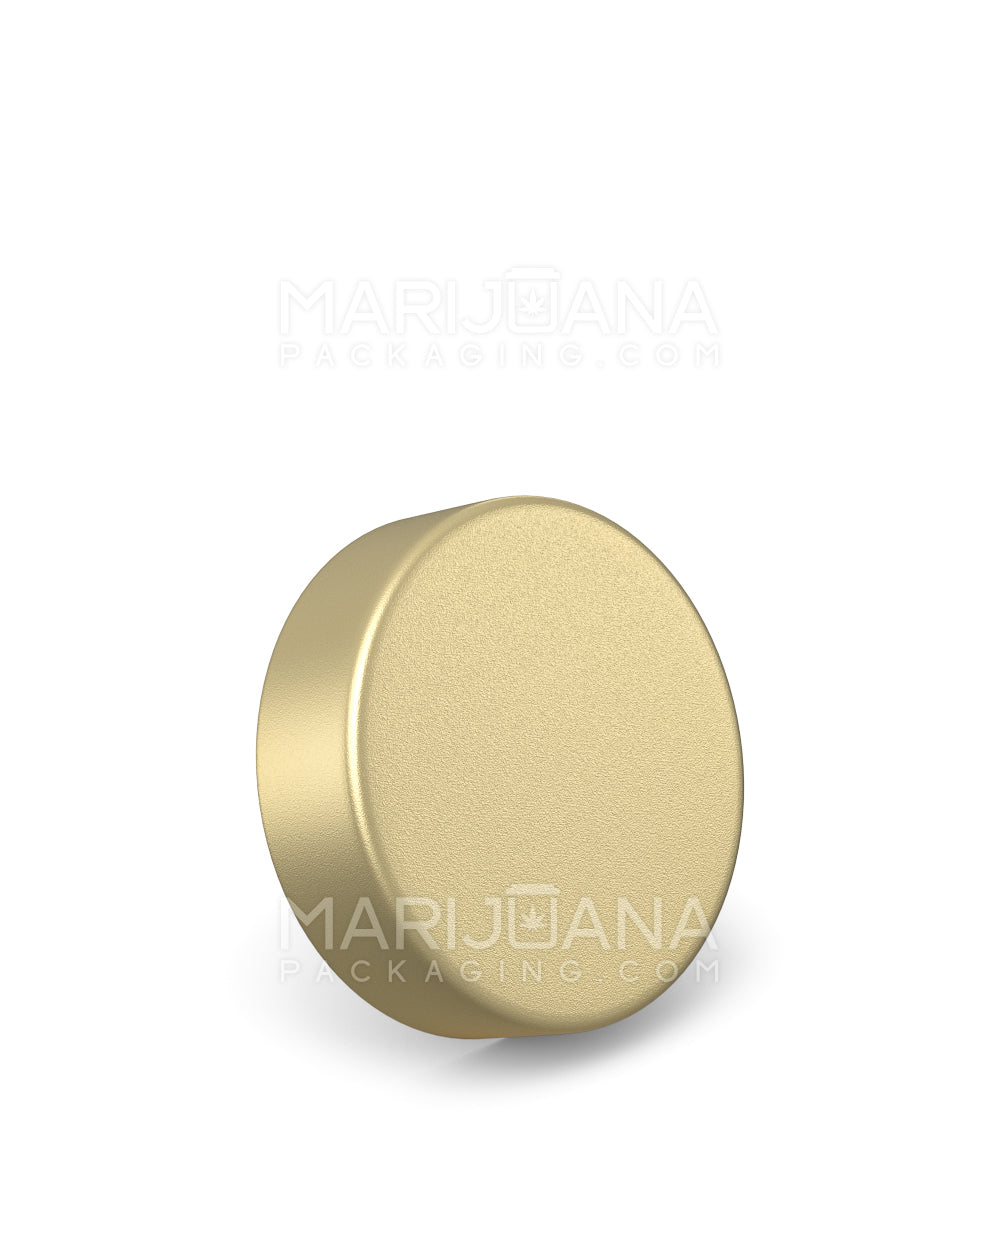 Child Resistant | Smooth Flat Push Down & Turn Plastic Caps w/ Foam Liner | 50mm - Matte Gold - 100 Count - 1